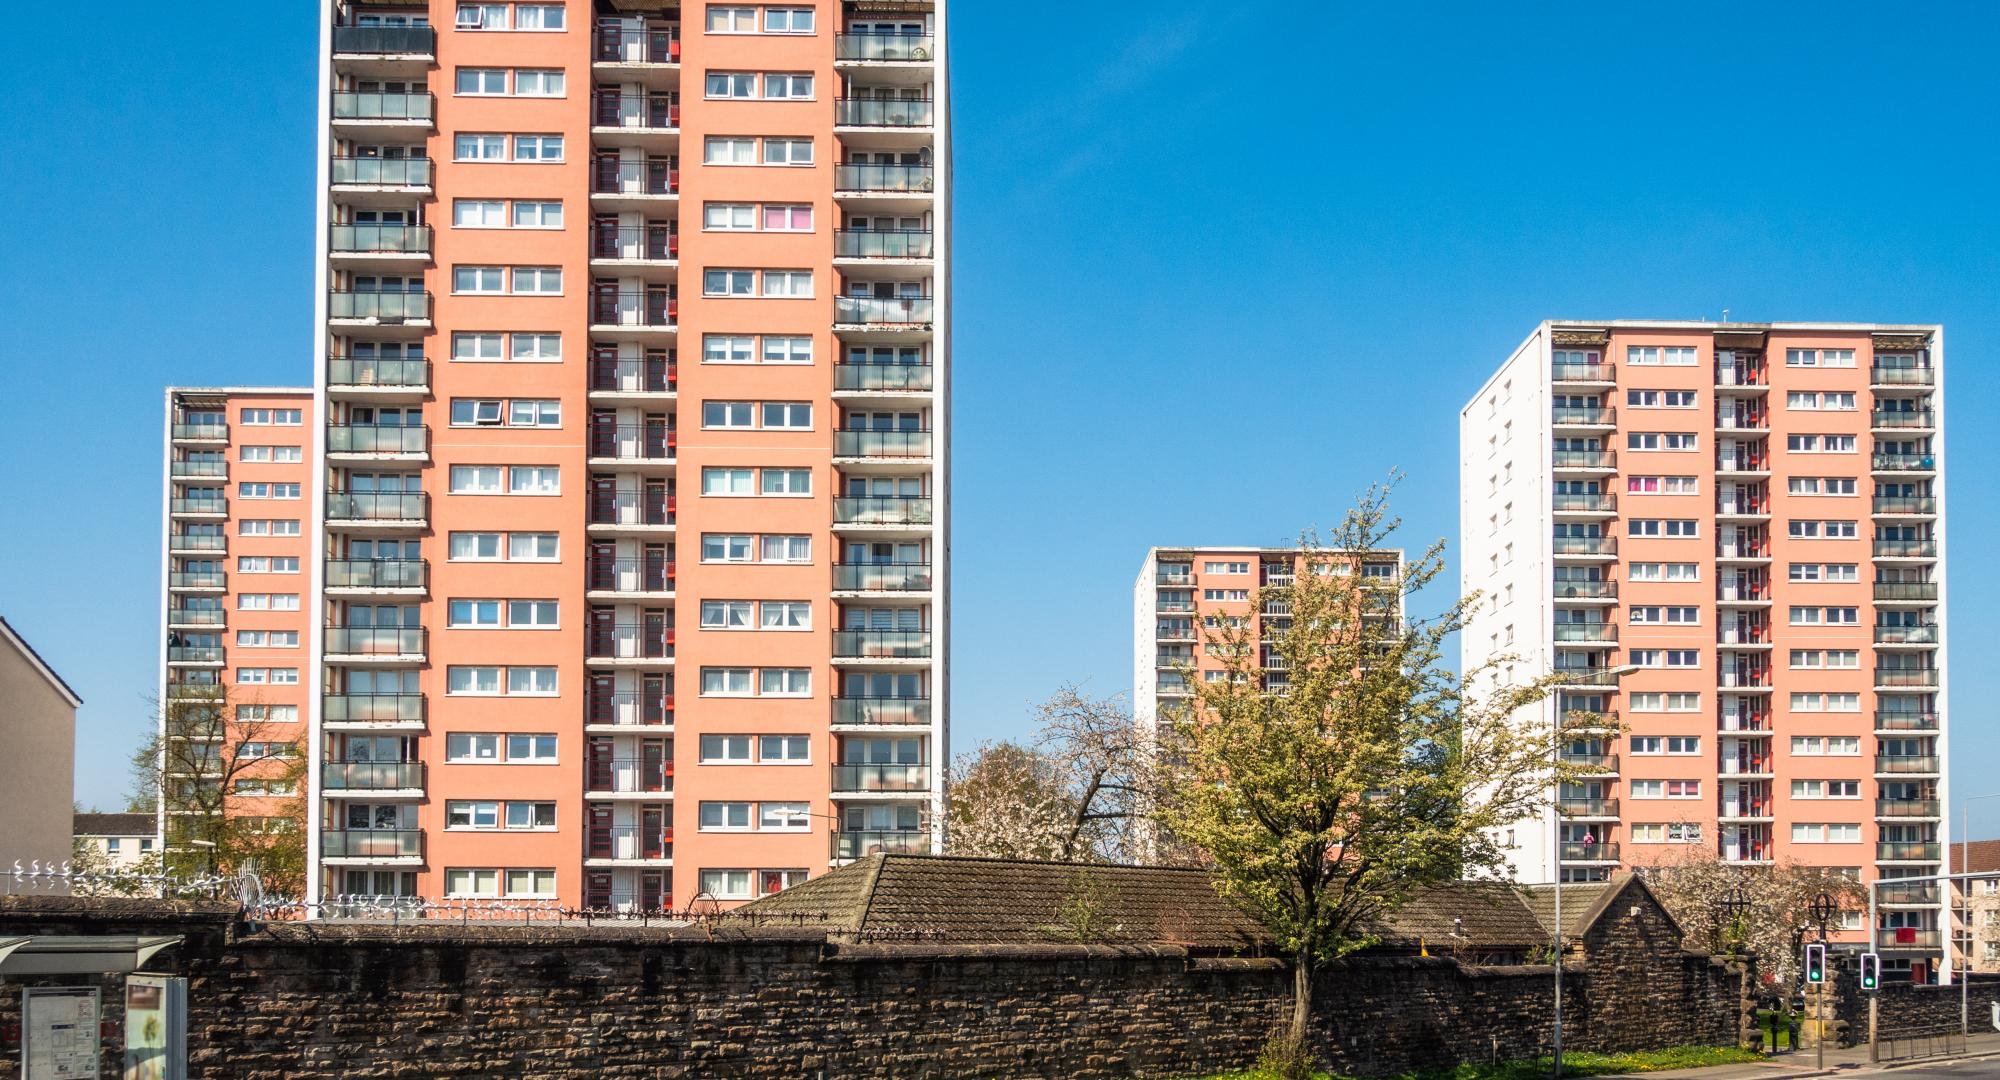 View of two blocks of flats in the UK